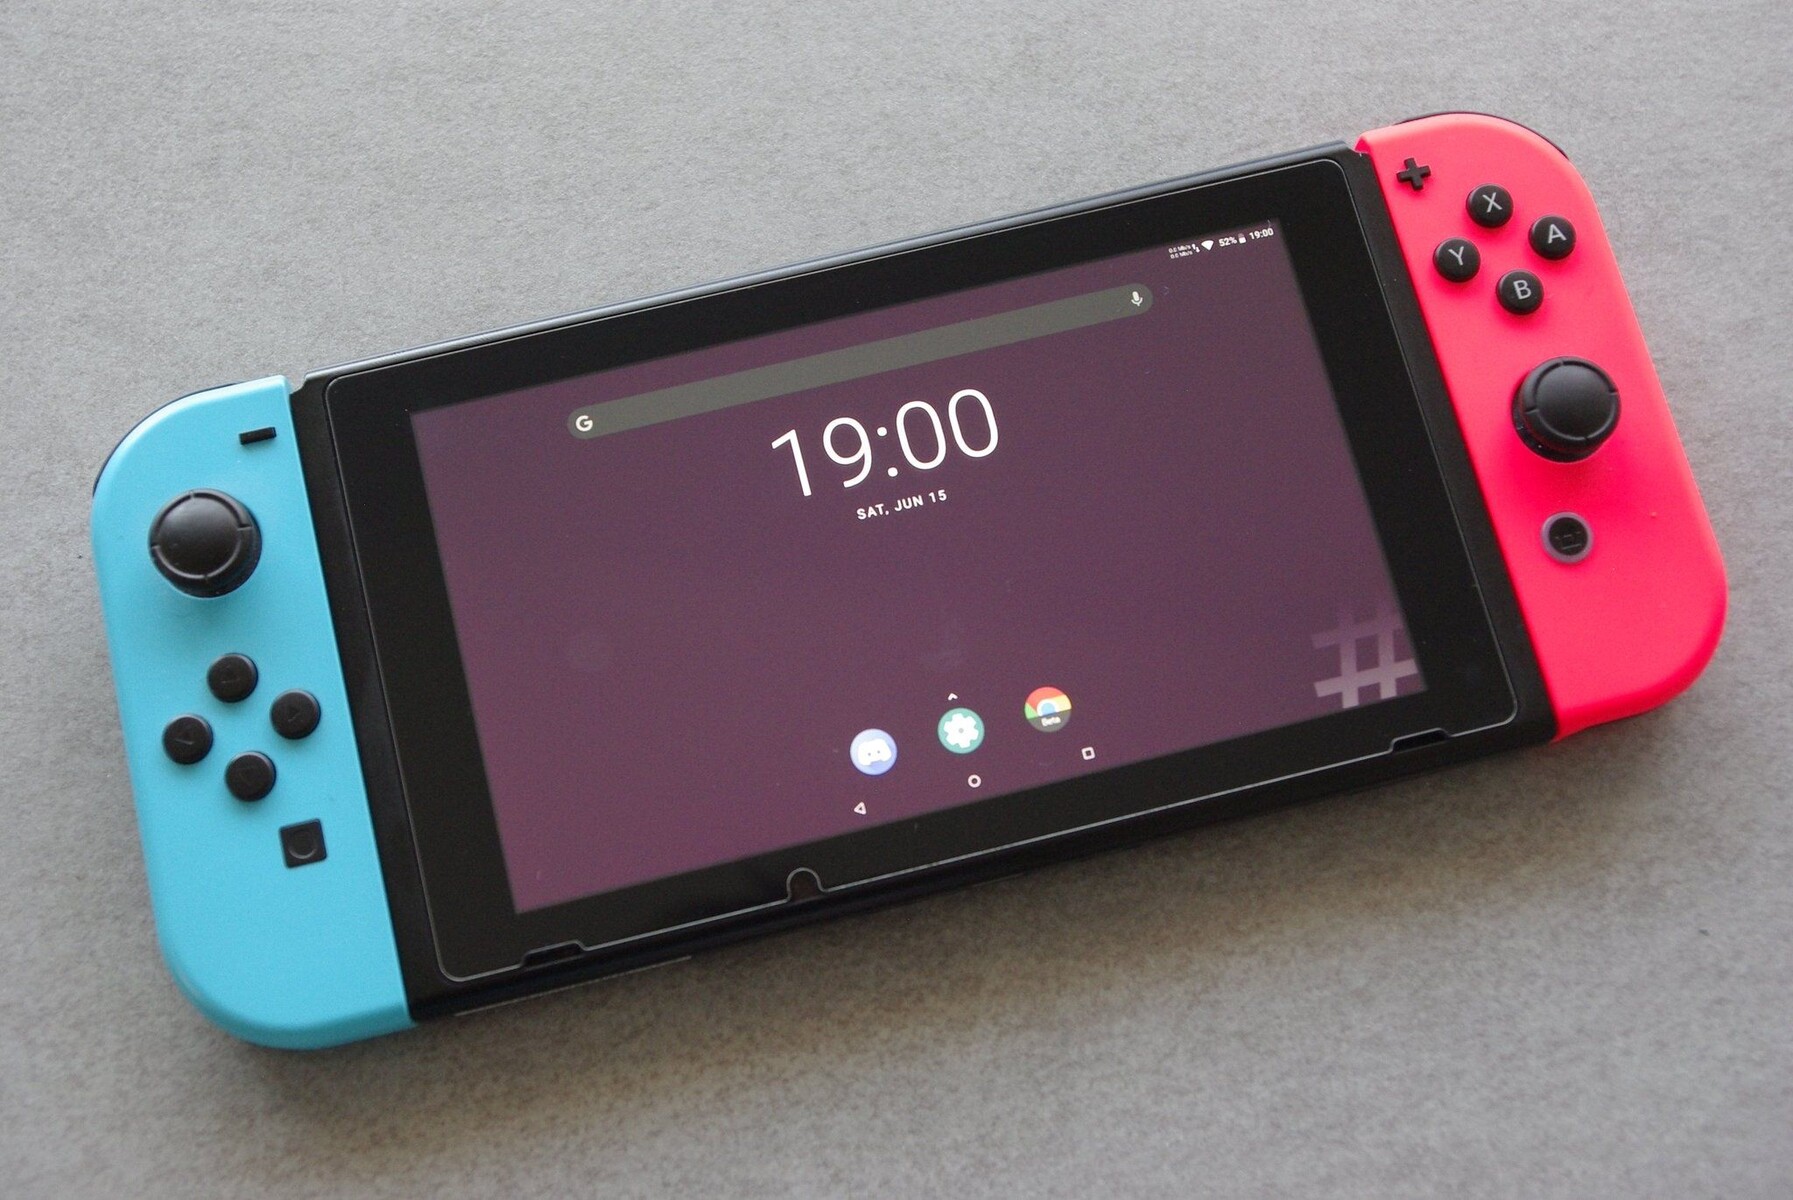 You can now install Android on your Nintendo Switch